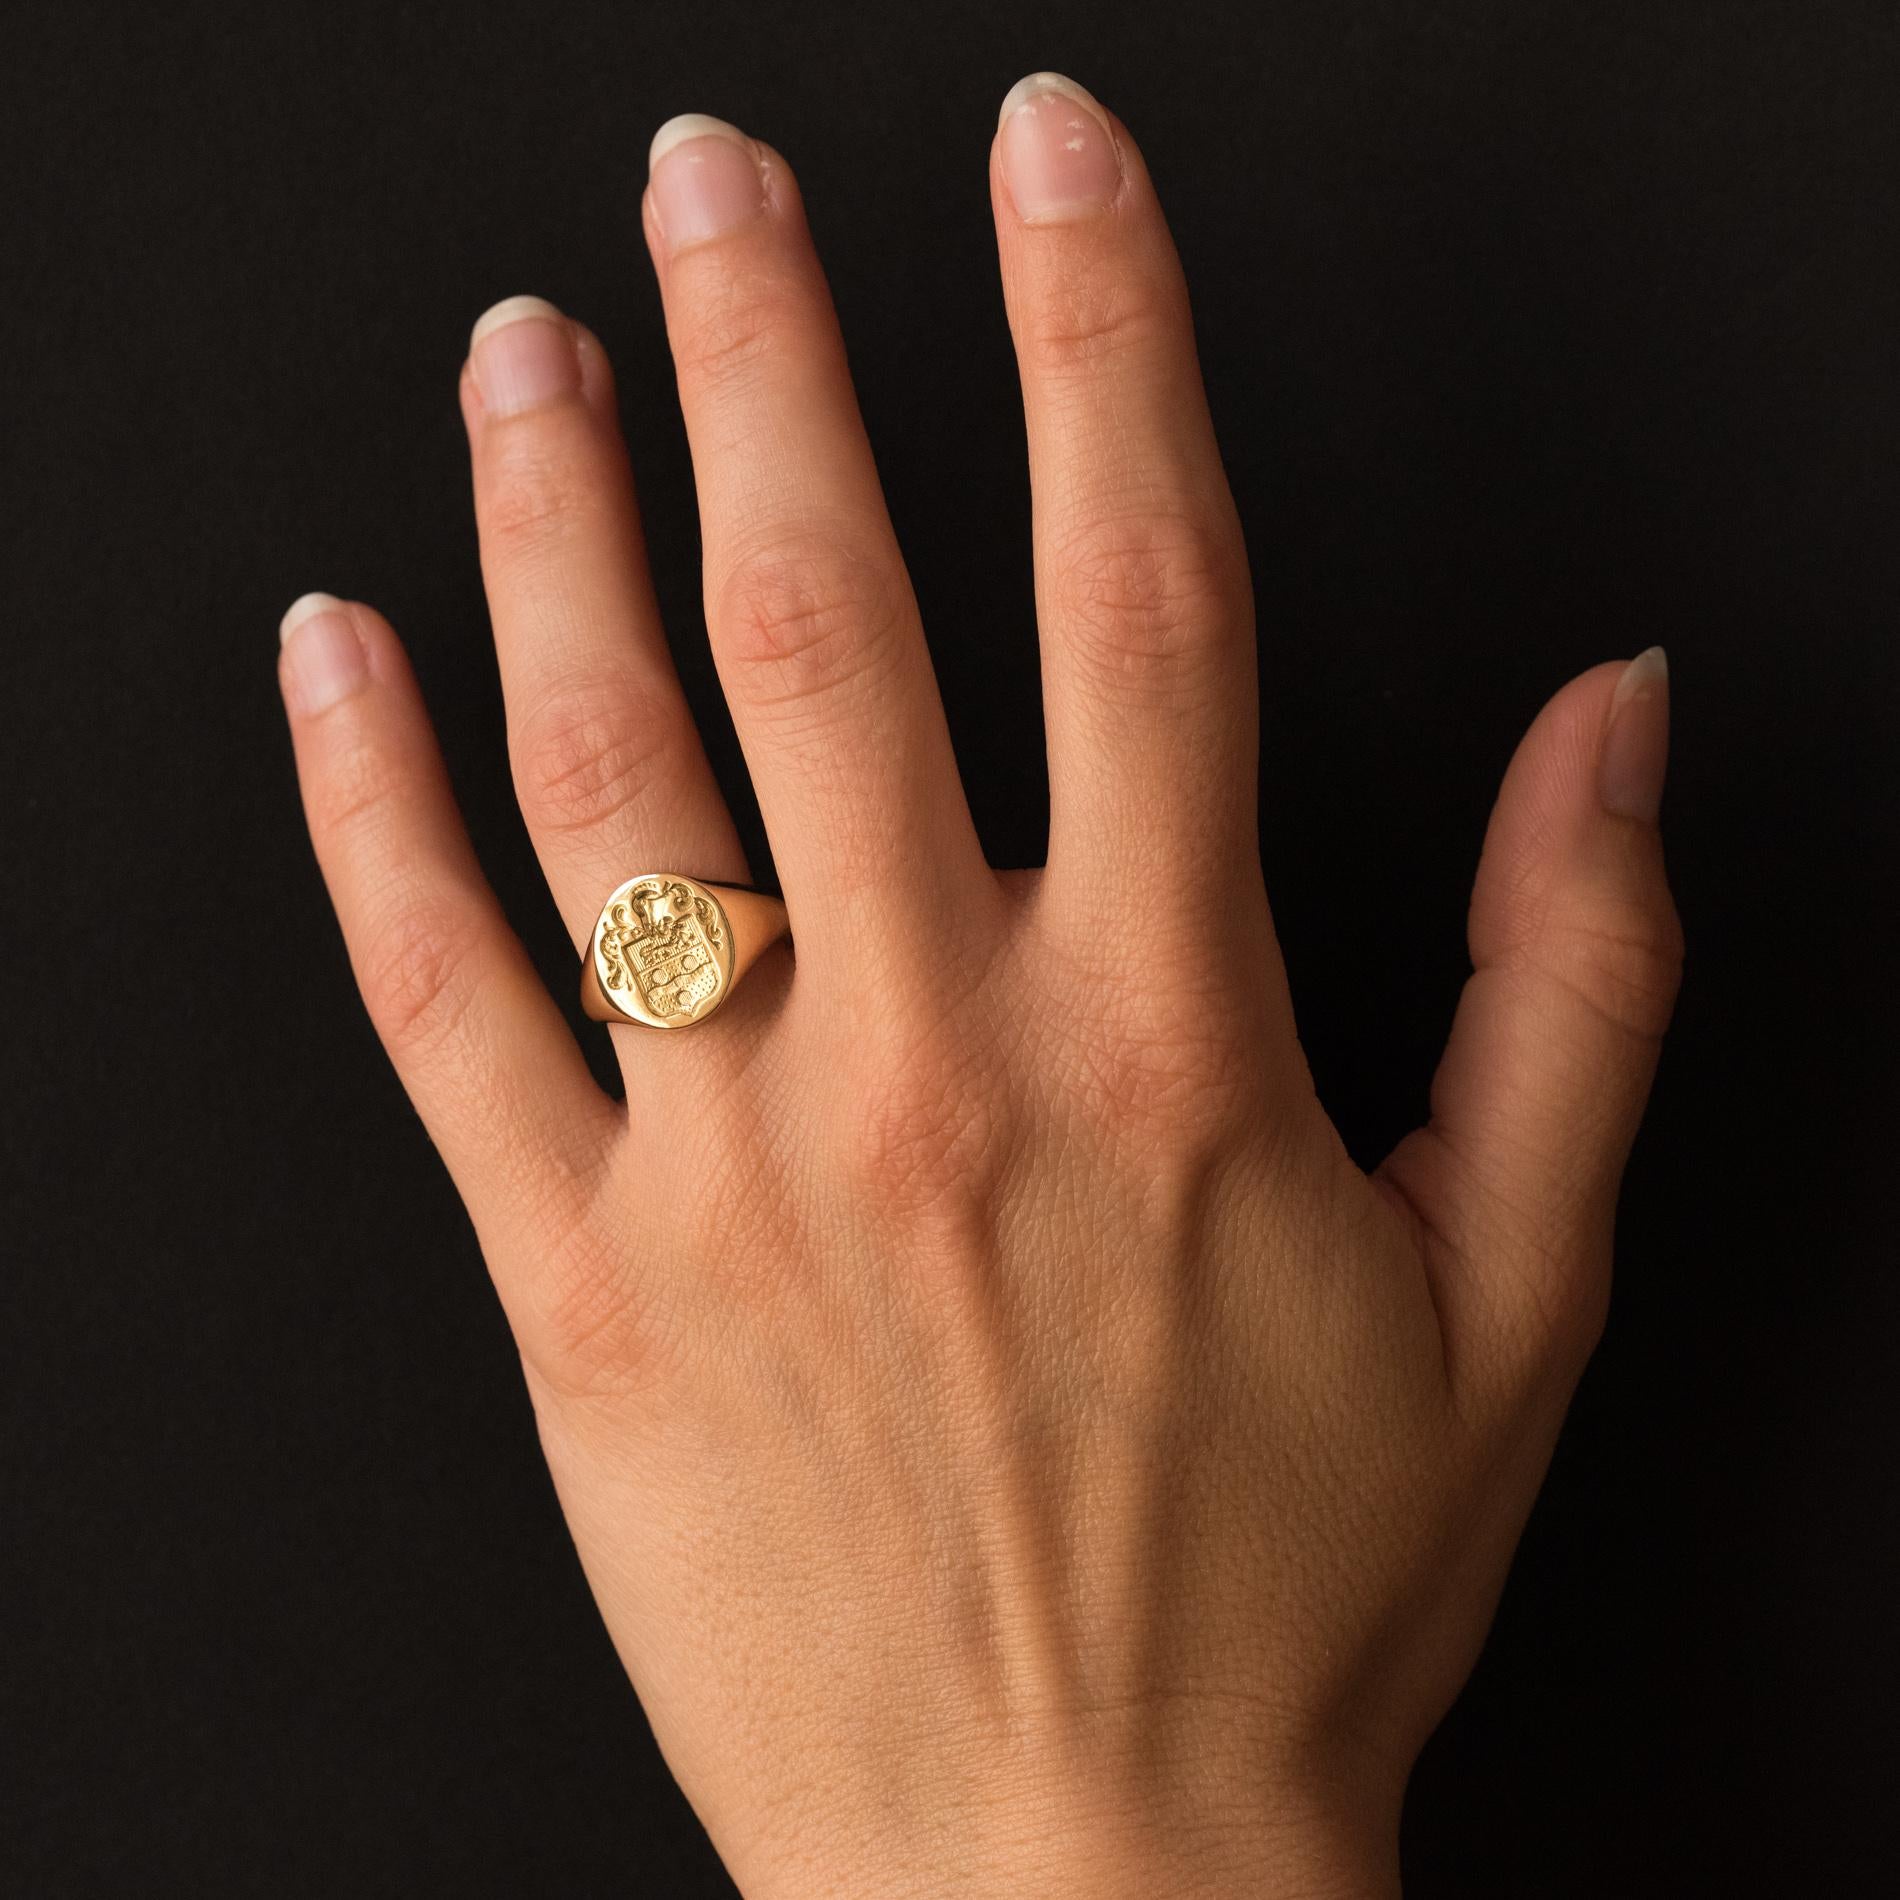 Signet ring in 18 karat yellow gold, eagle's head hallmark.
The mountingof this unisex ring is engraved with a blazon wearing a helmet and feathers. A timeless mount that can be worn either by a man or a woman.
Height: 13.6 mm, width: 12.7 mm,